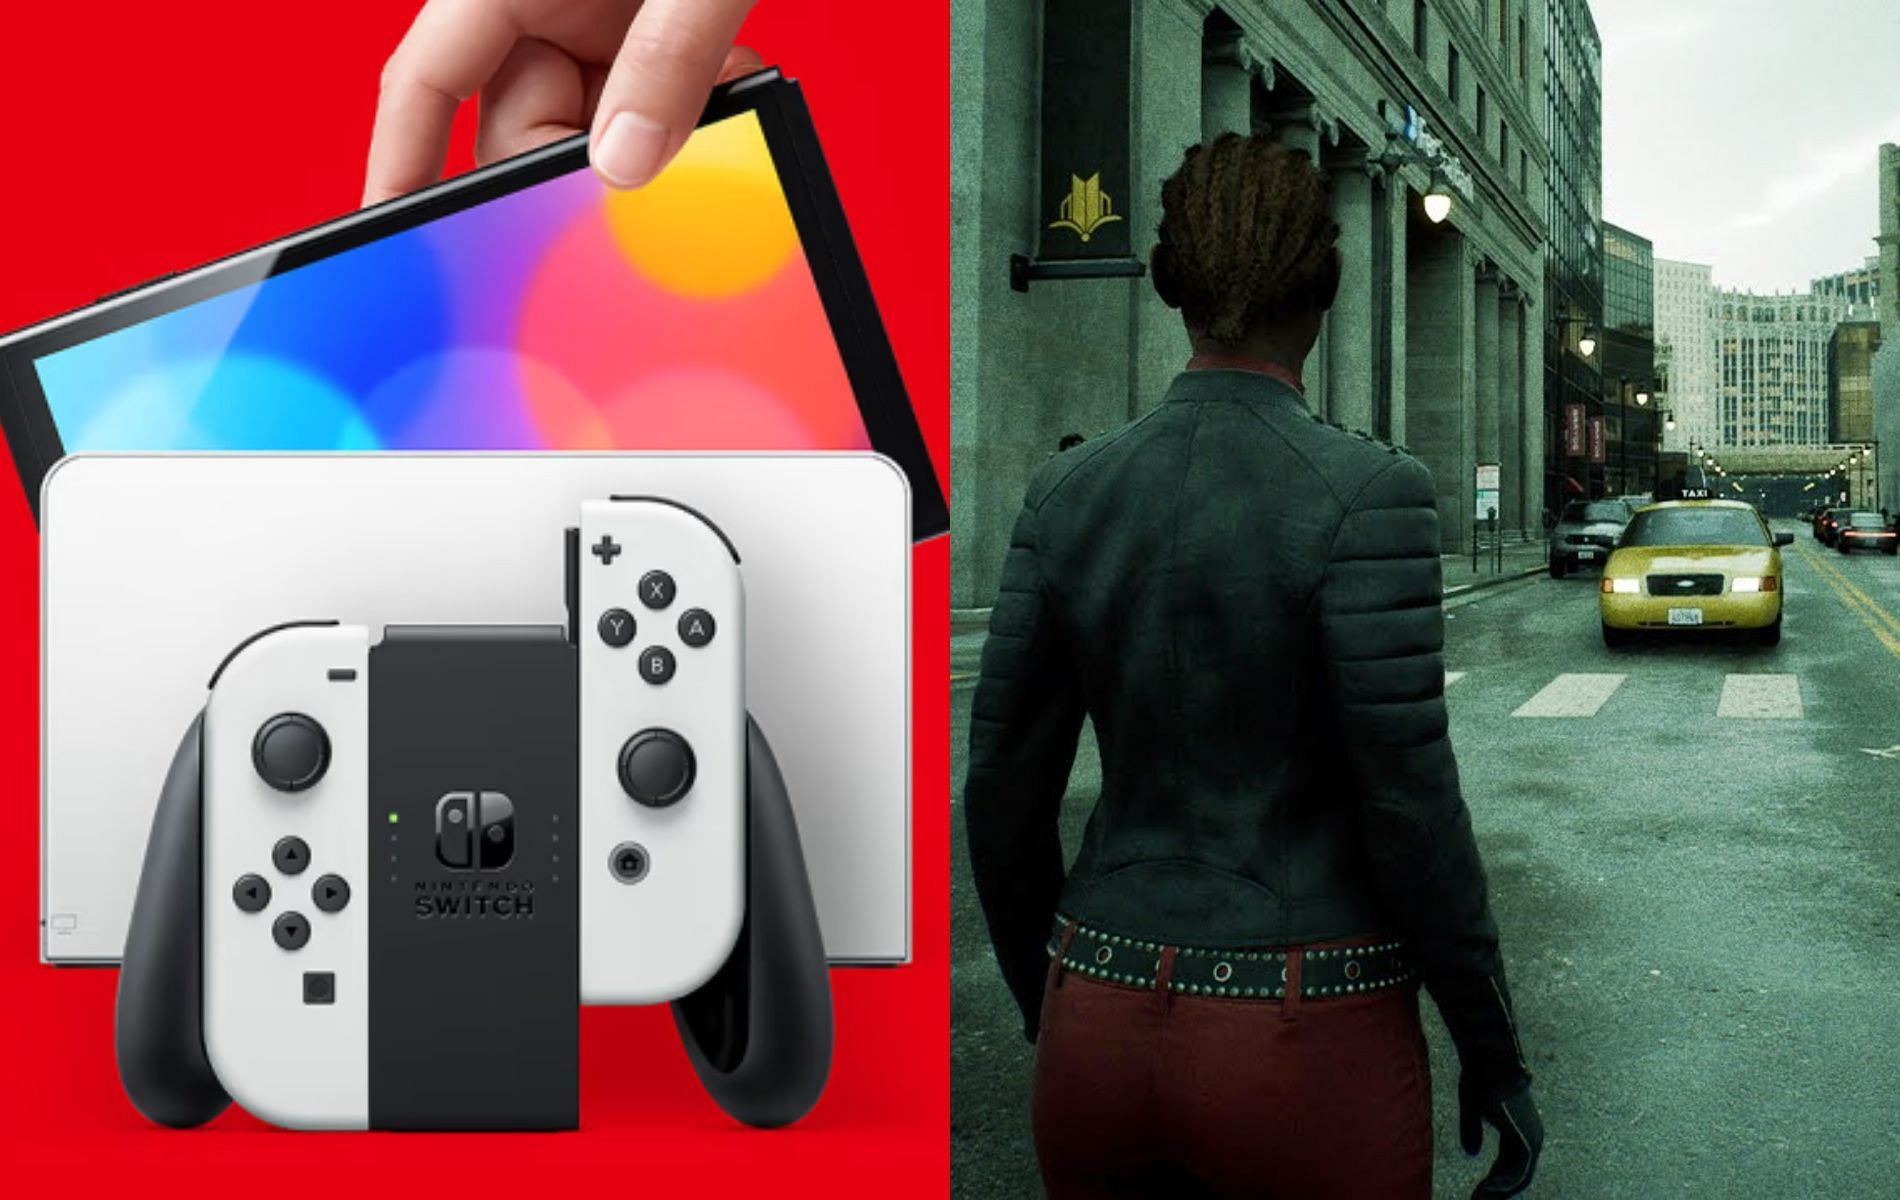 Cover art featuring promotional artwork for the Nintendo Switch OLED Model and screenshot from the Unreal Engine 5 &quot;The Matrix Awakens&quot; demo